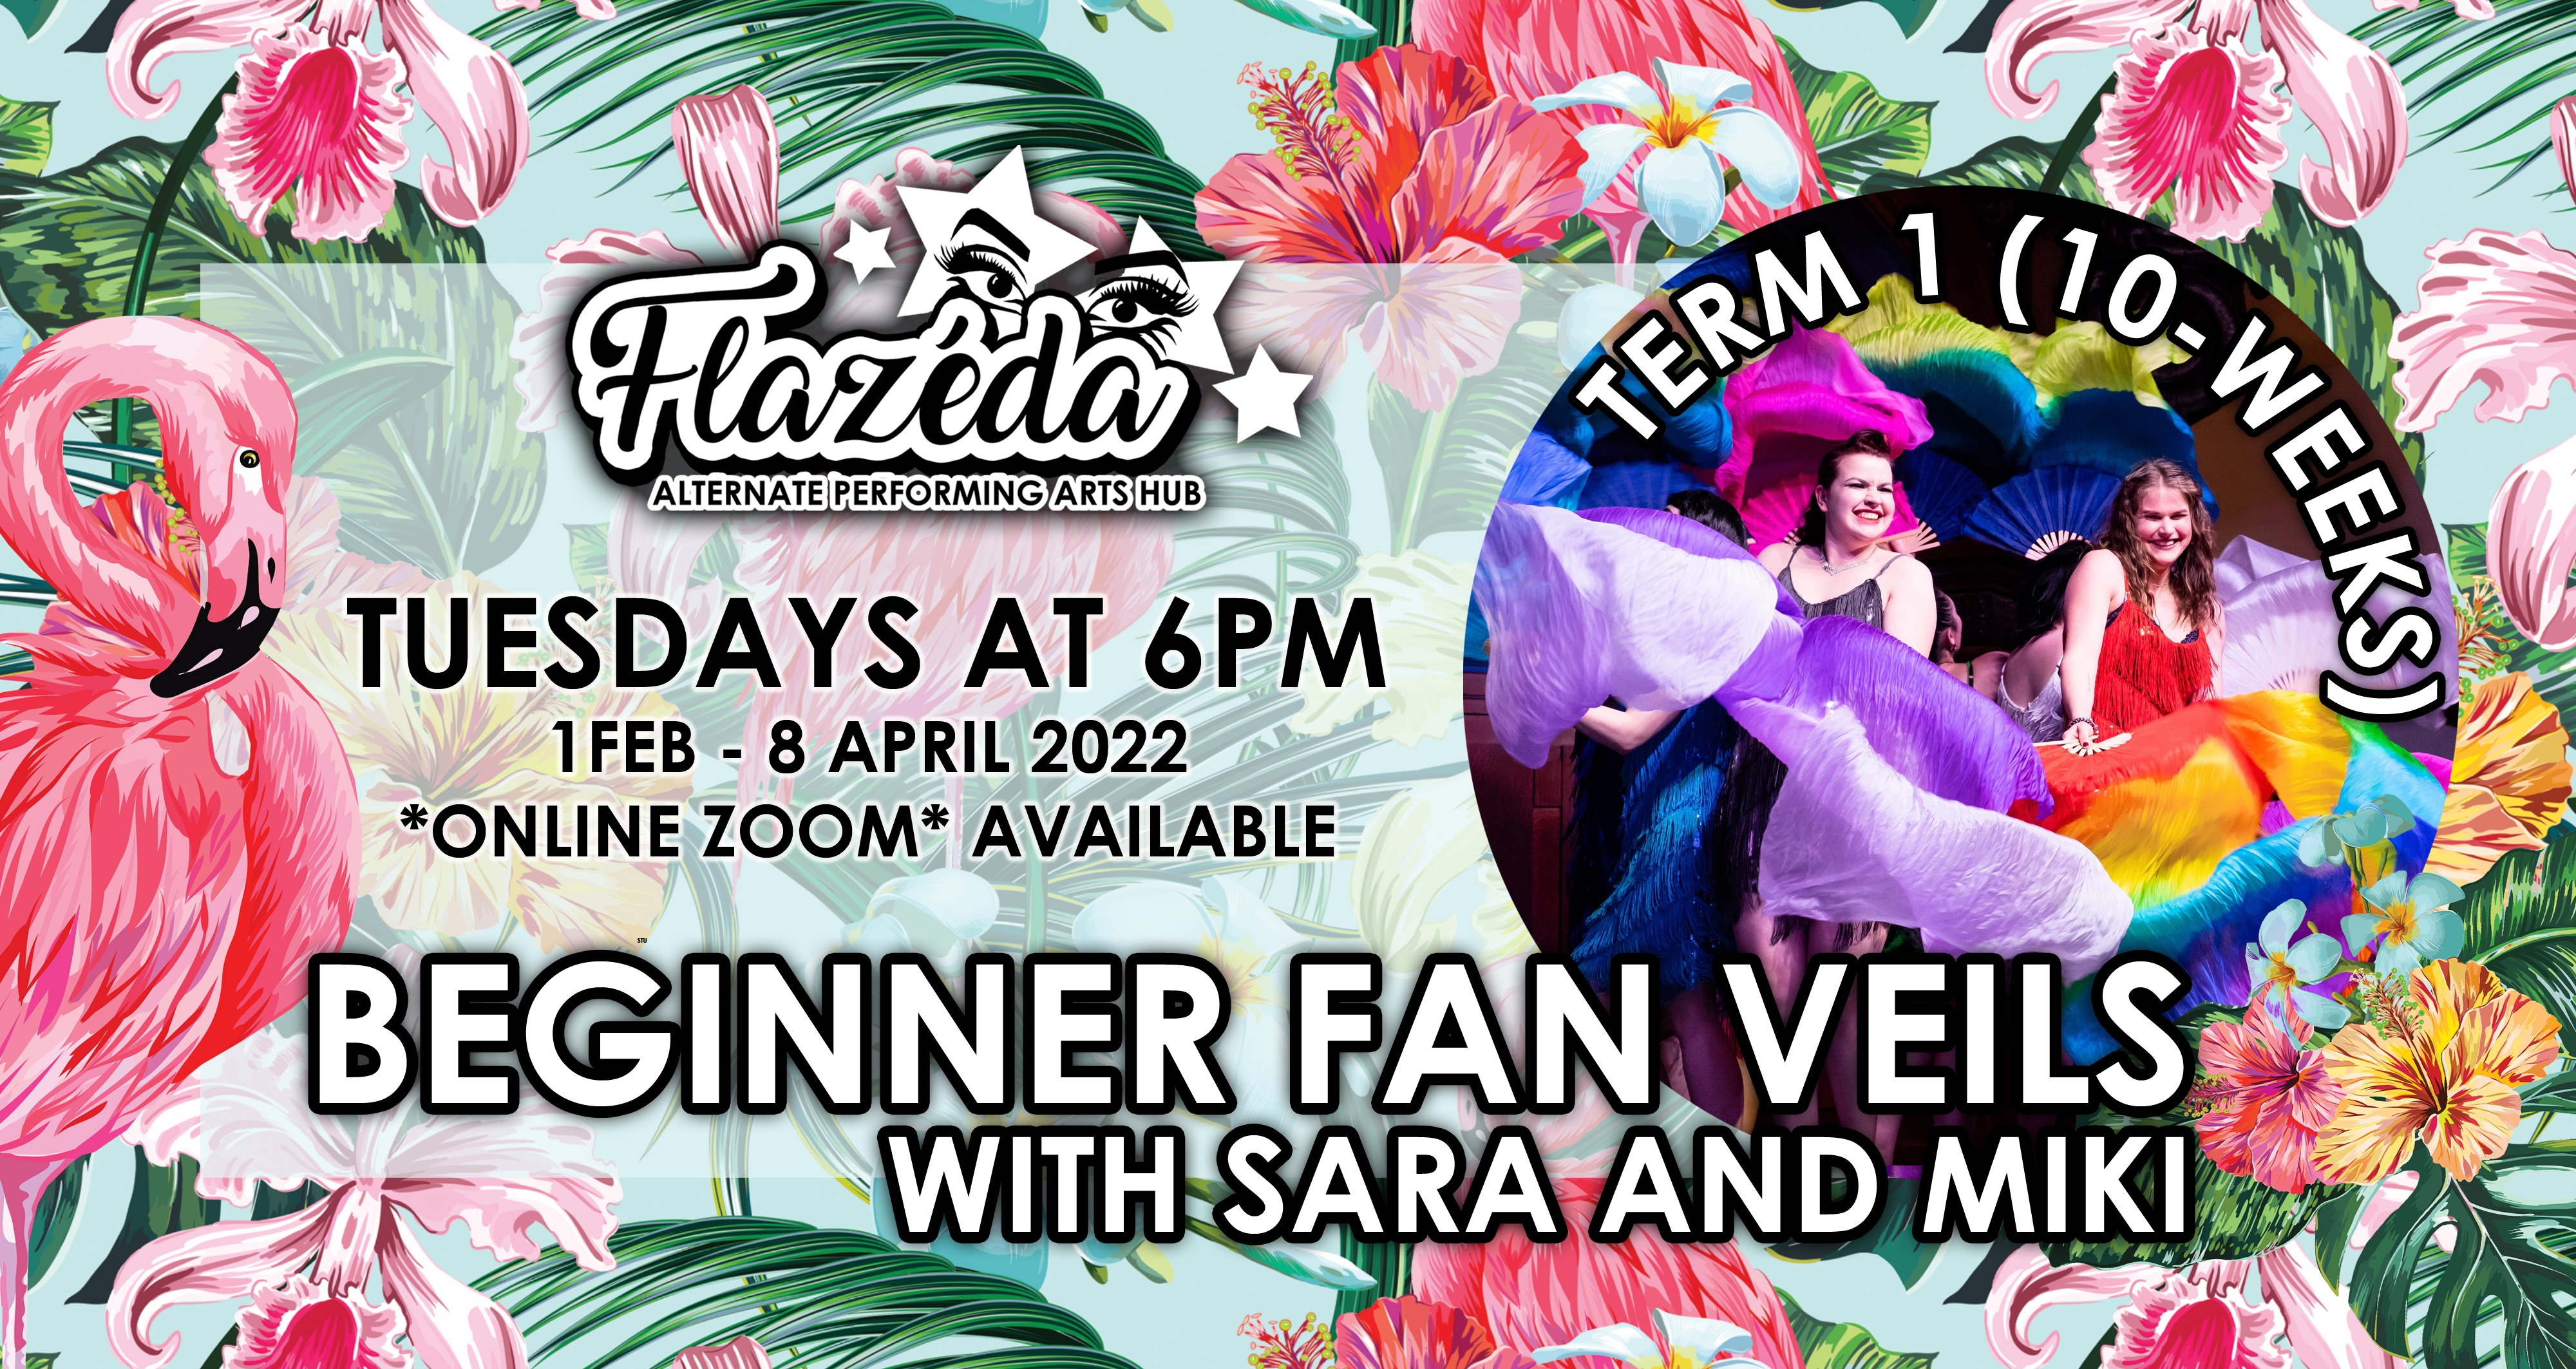 Beginner Fan Veils with Sara and Miki